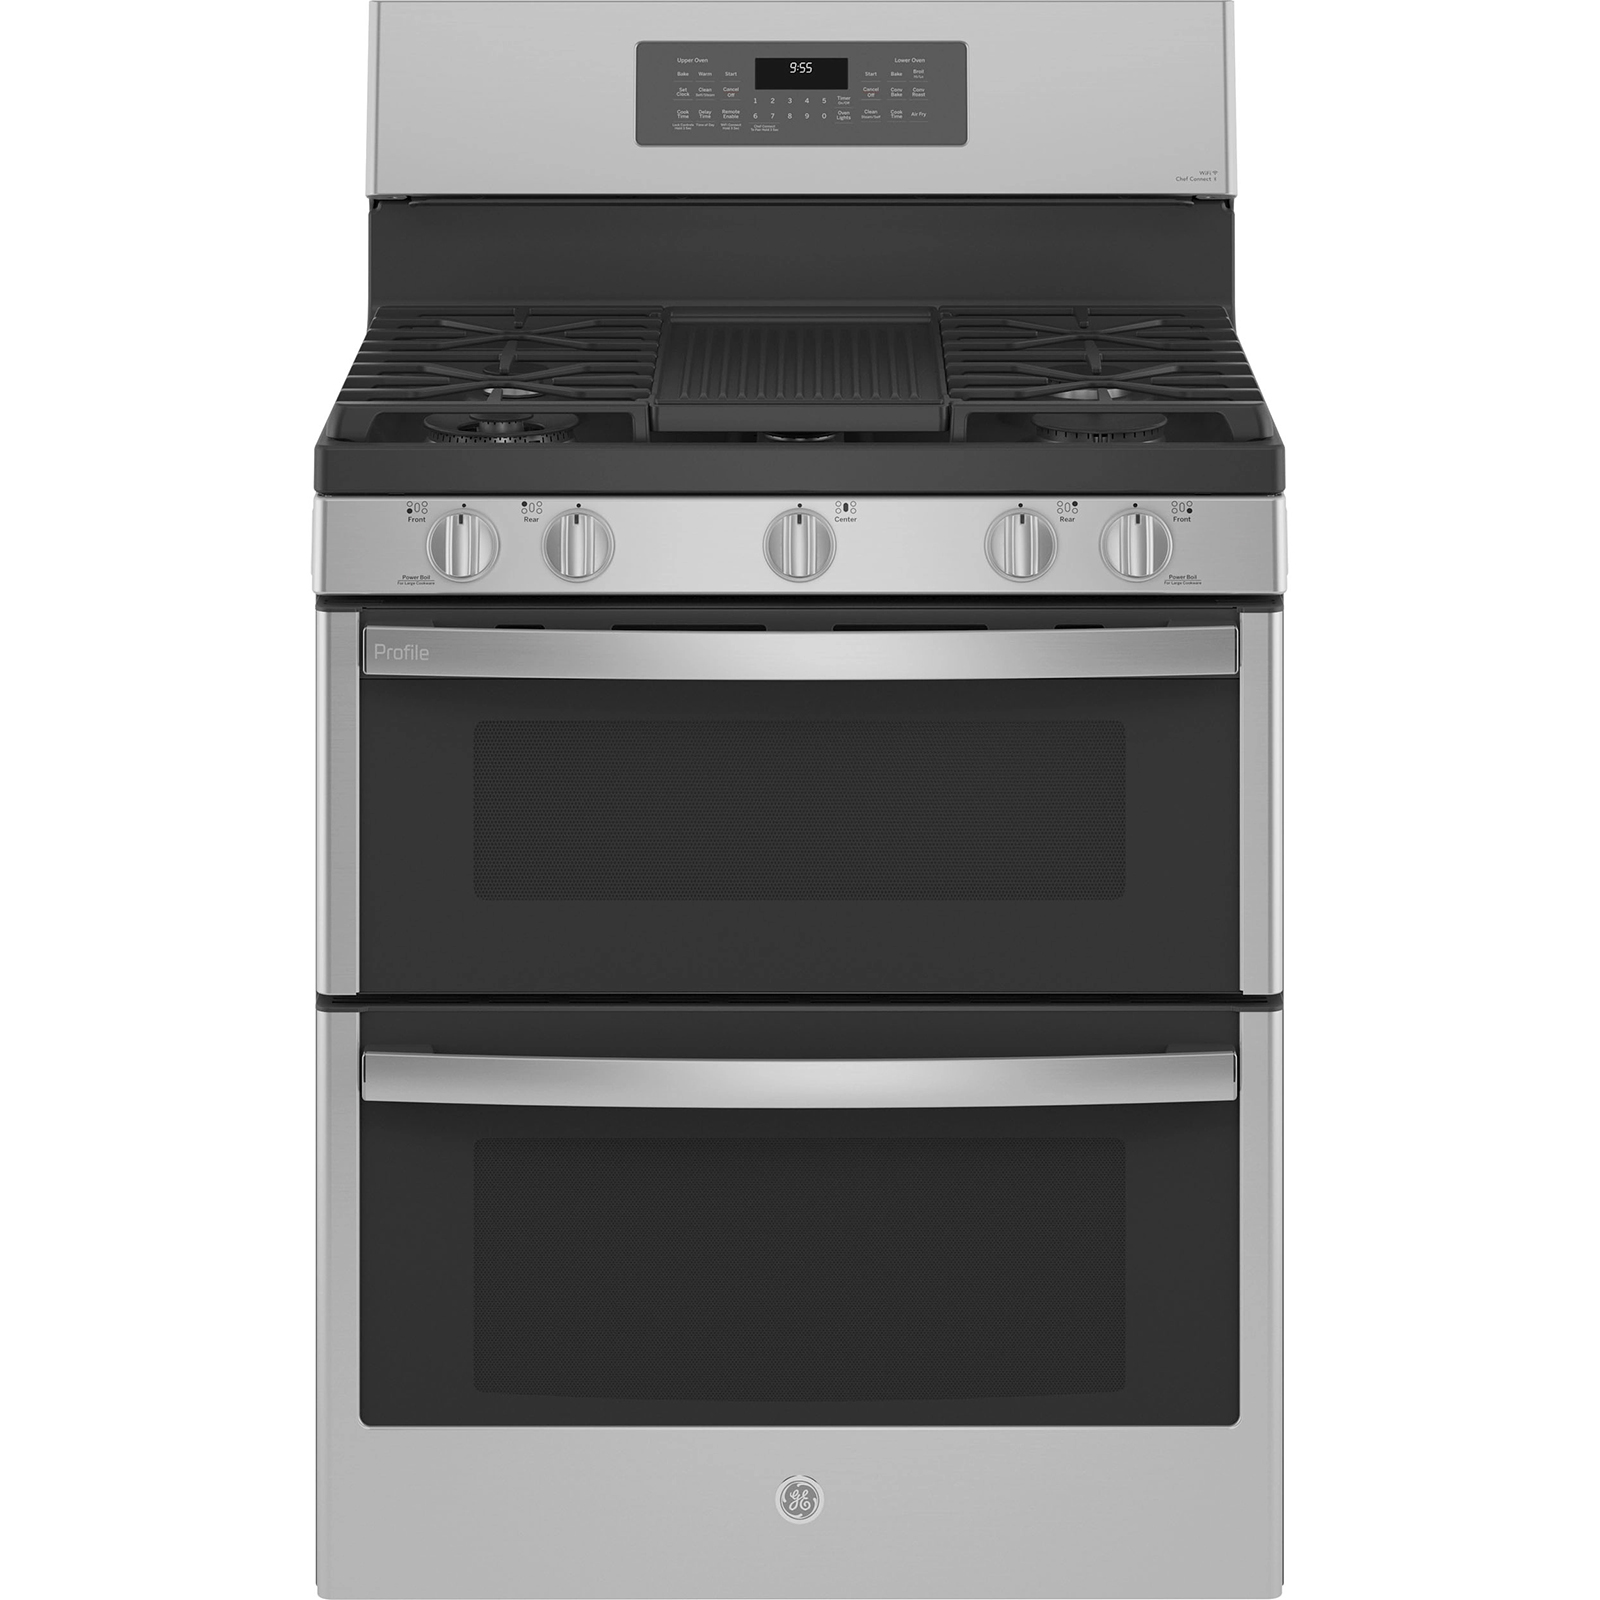 General Electric PGB965YPFS  Freestanding Gas Double Oven Convection Range